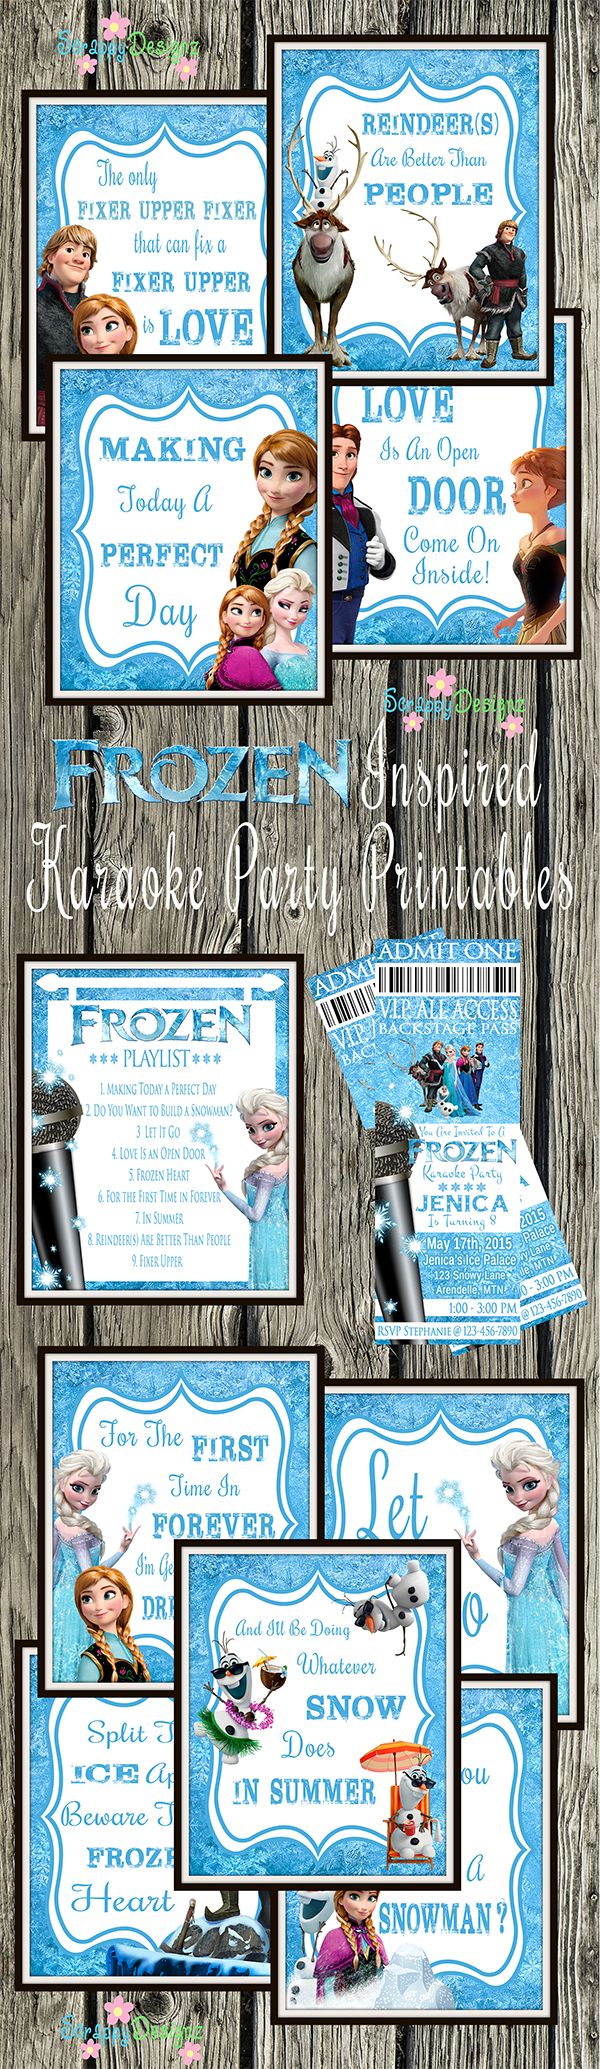 Frozen Inspired Karaoke Party Printables Includes 10 8 x 10 posters one f